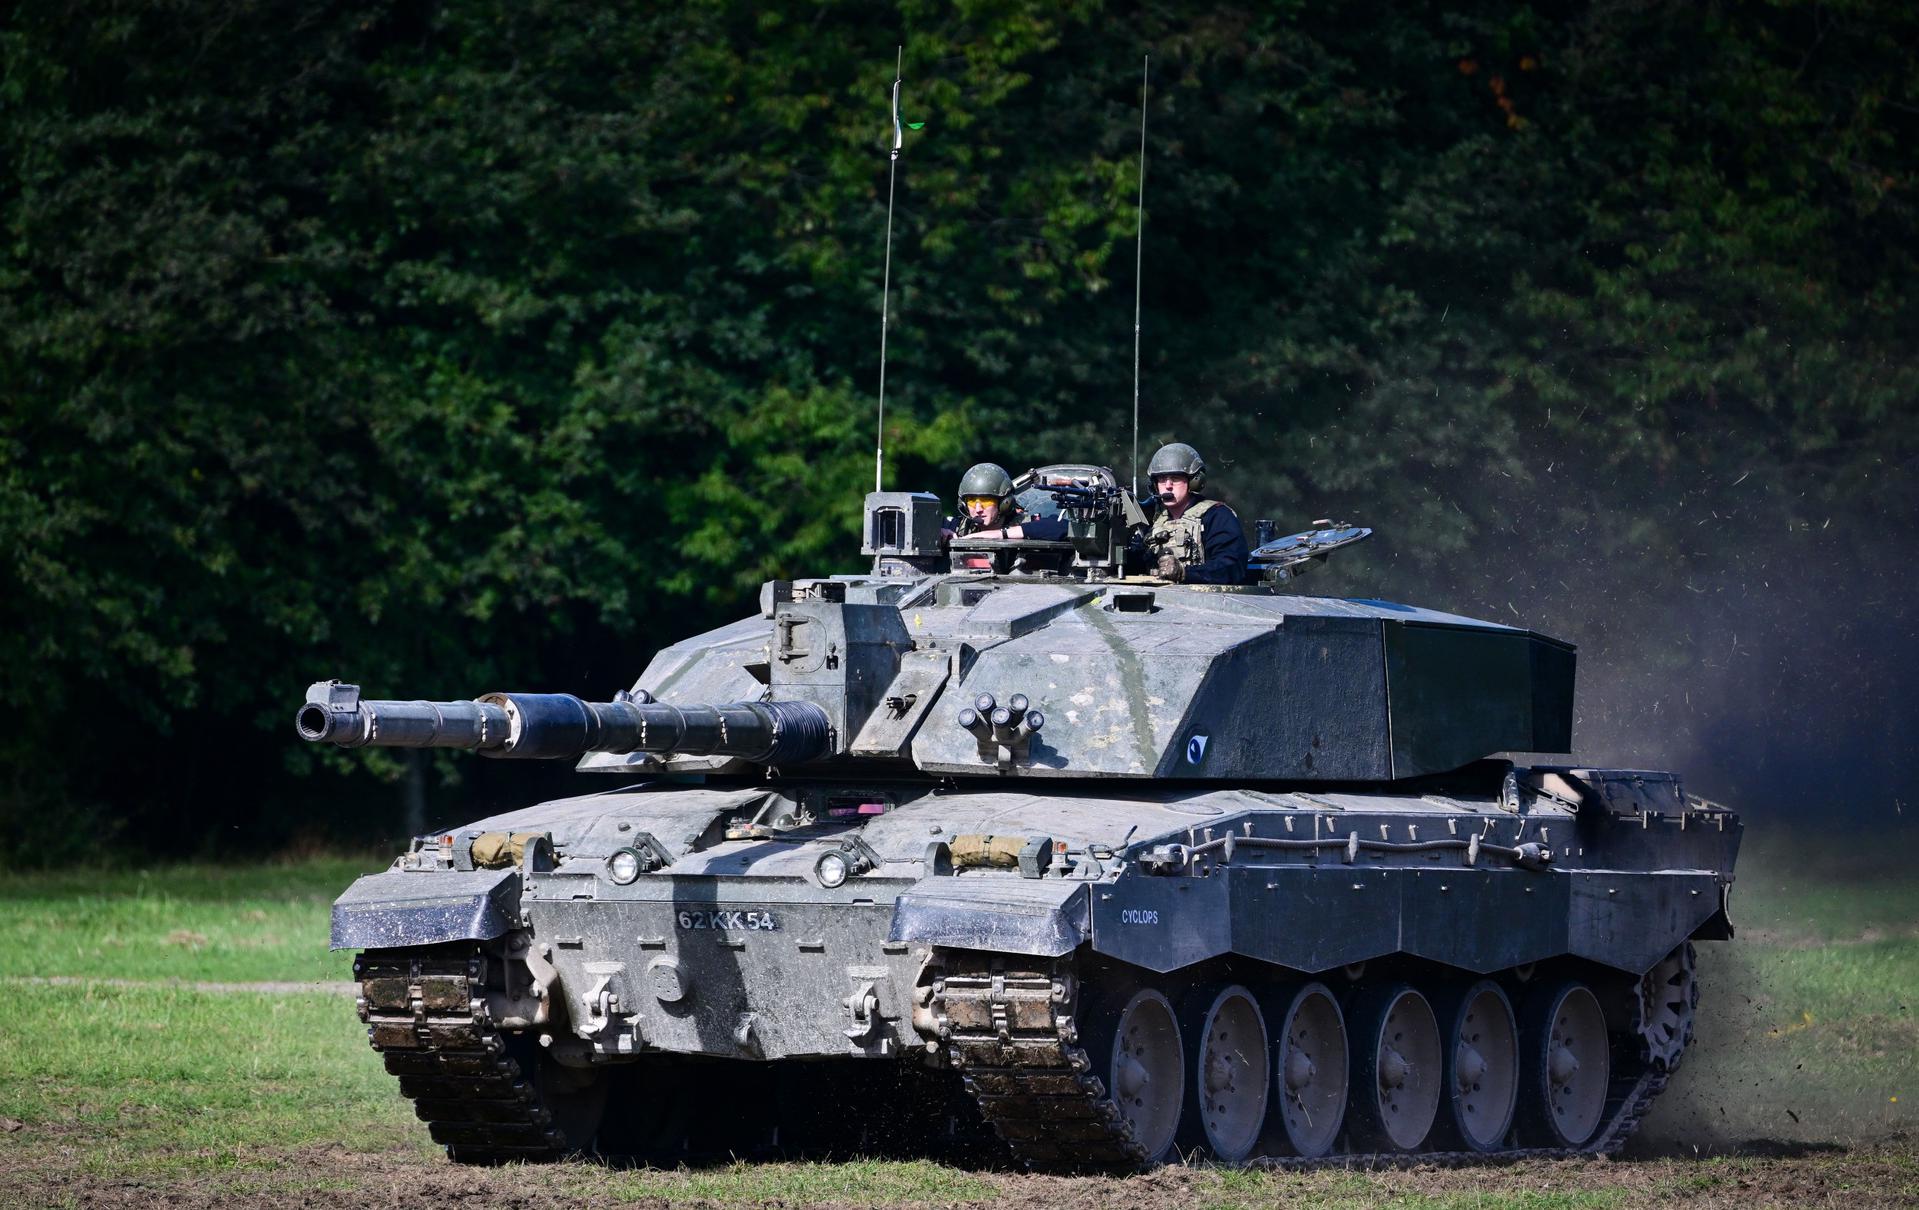 On January 16, Great Britain may announce the provision of Challenger 2